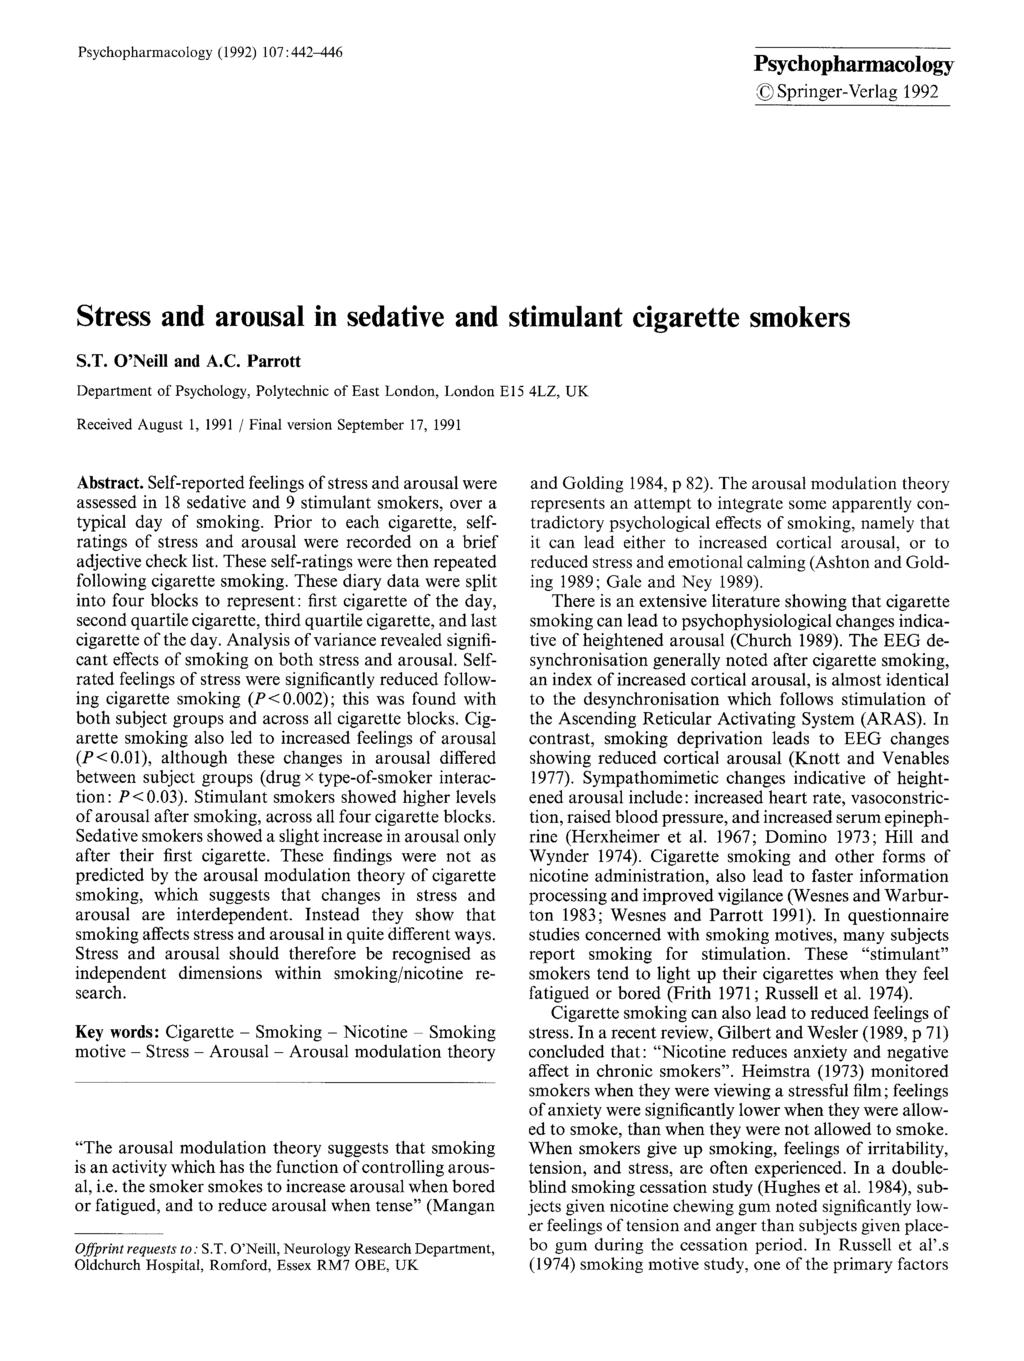 Psychopharmacology (1992) 107:442-446 Psychopharmacology Springer-Verlag 1992 Stress and arousal in sedative and stimulant cigarette smokers S.T. O'Neill and A.C.